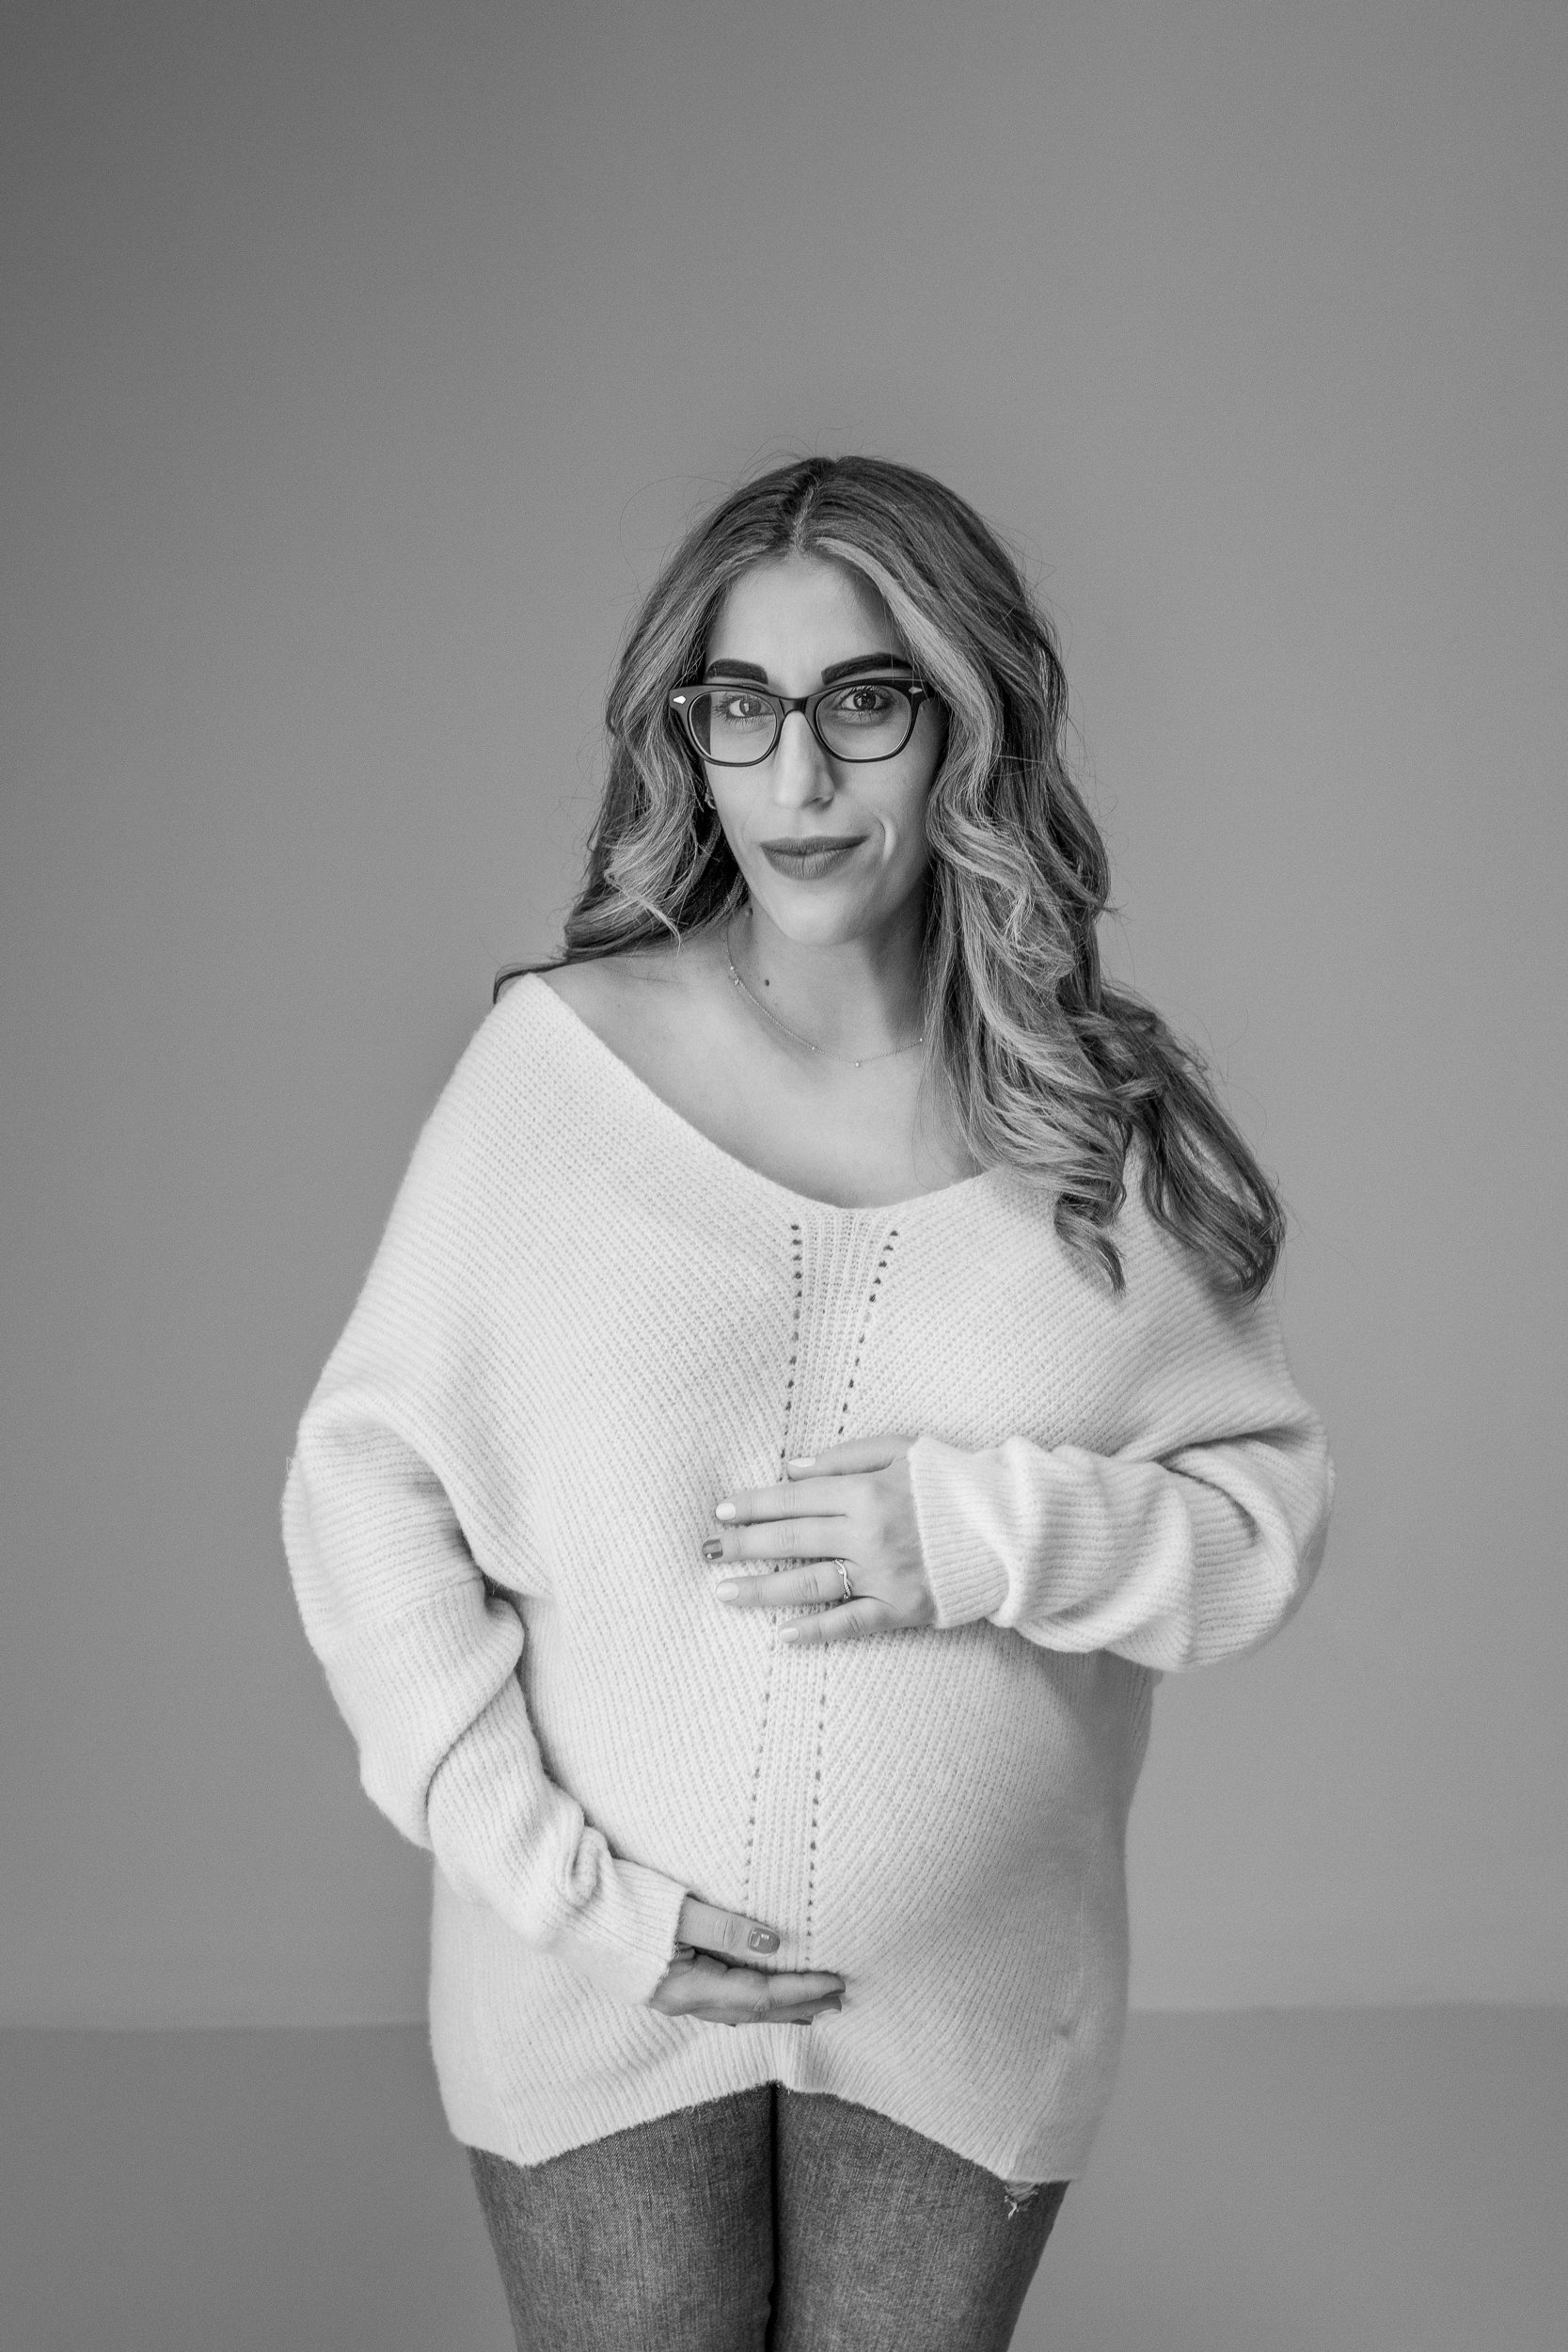  New Jersey Maternity Photographer Nicole Hawkins Photography captures a casual maternity shot. modern maternity pic inspiration #NicoleHawkinsPhotography #maternitysession #NJmaternityphotographer #NewJerseyphotographers #maternityphotos 